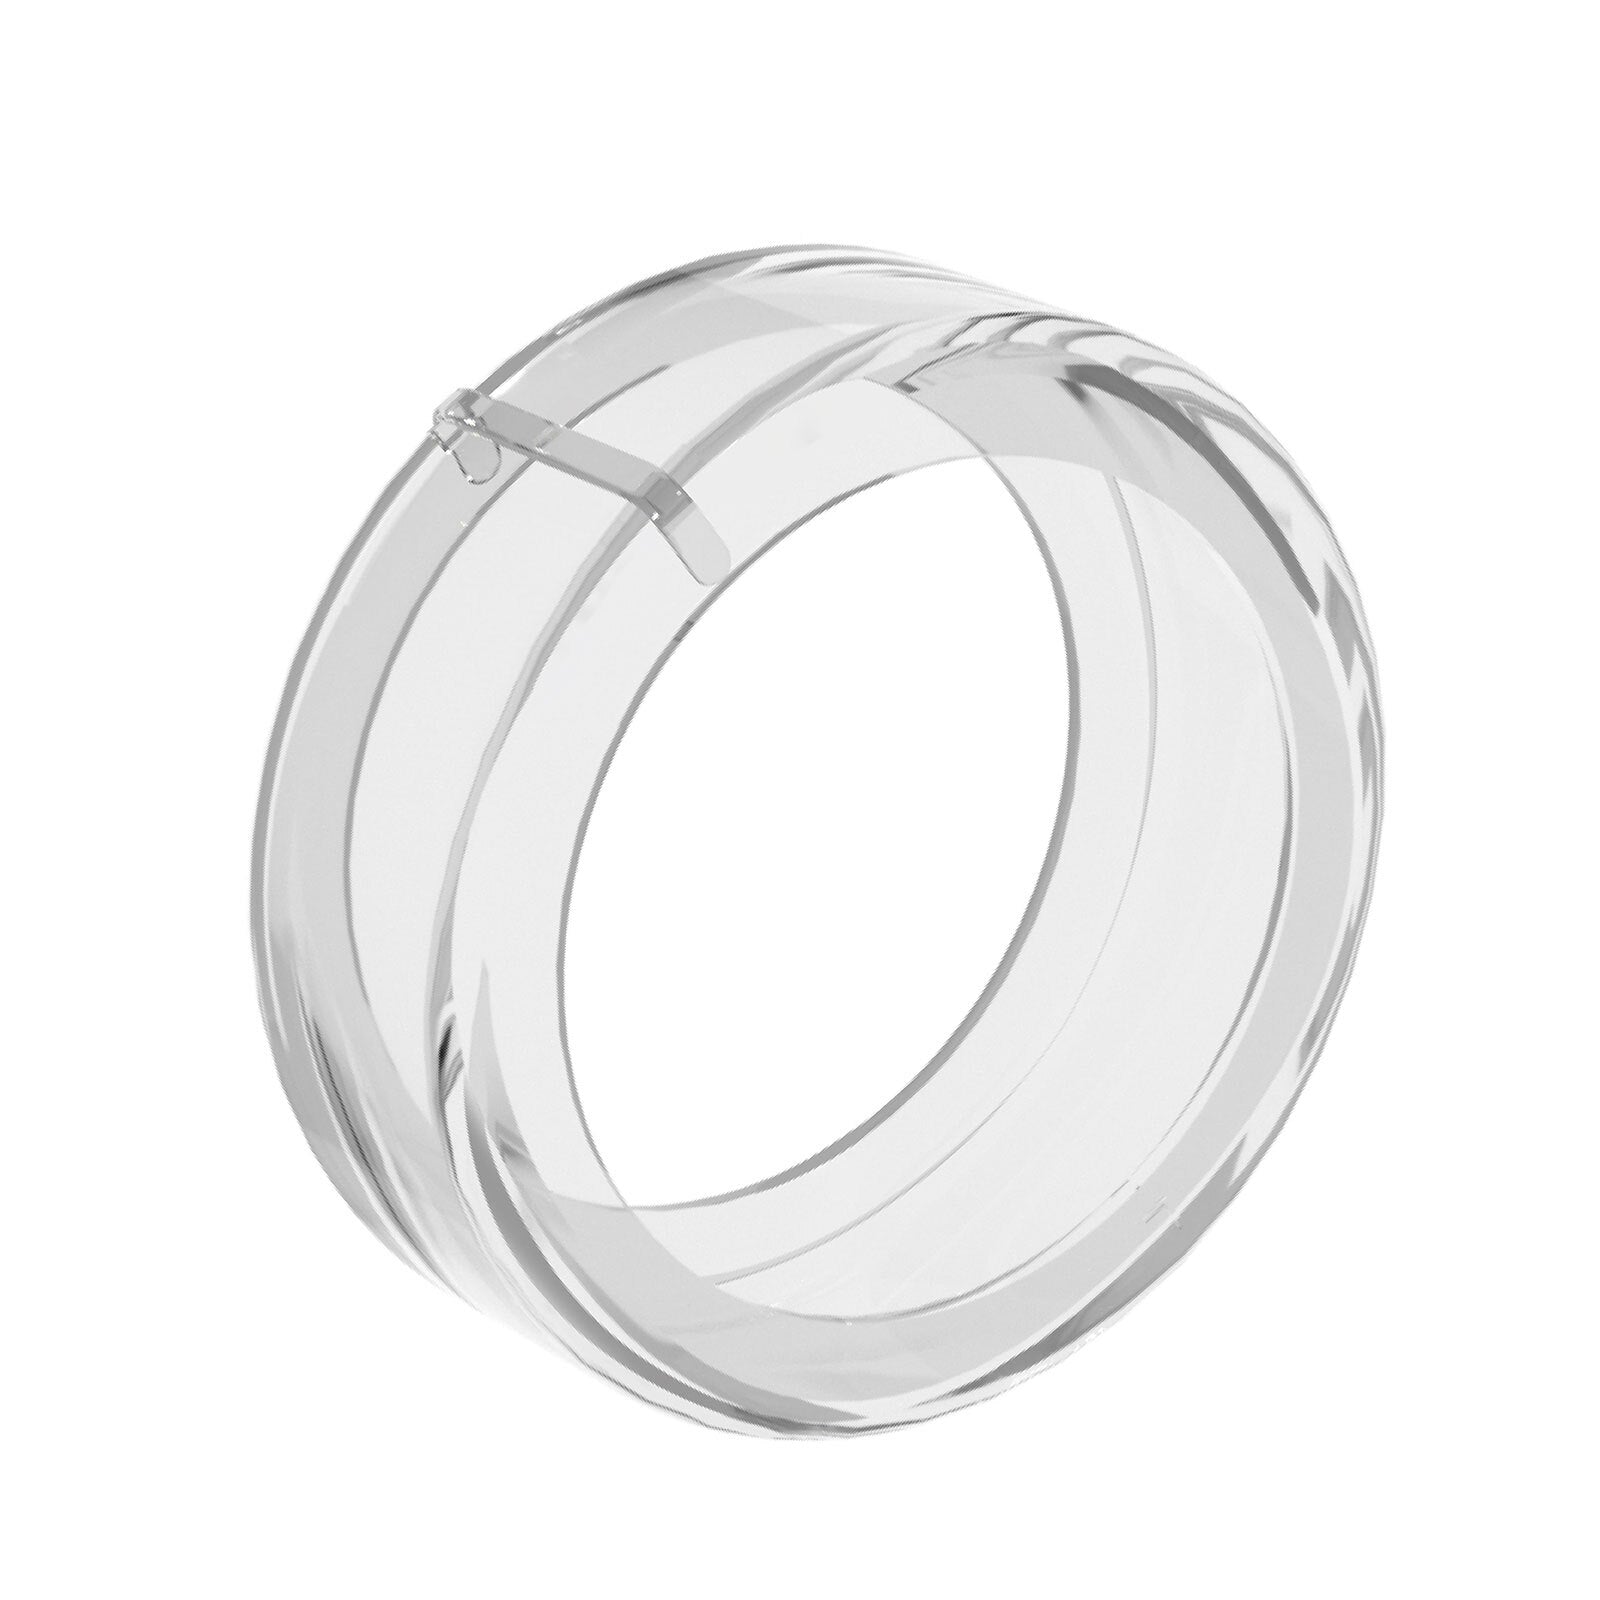 Ring Protector